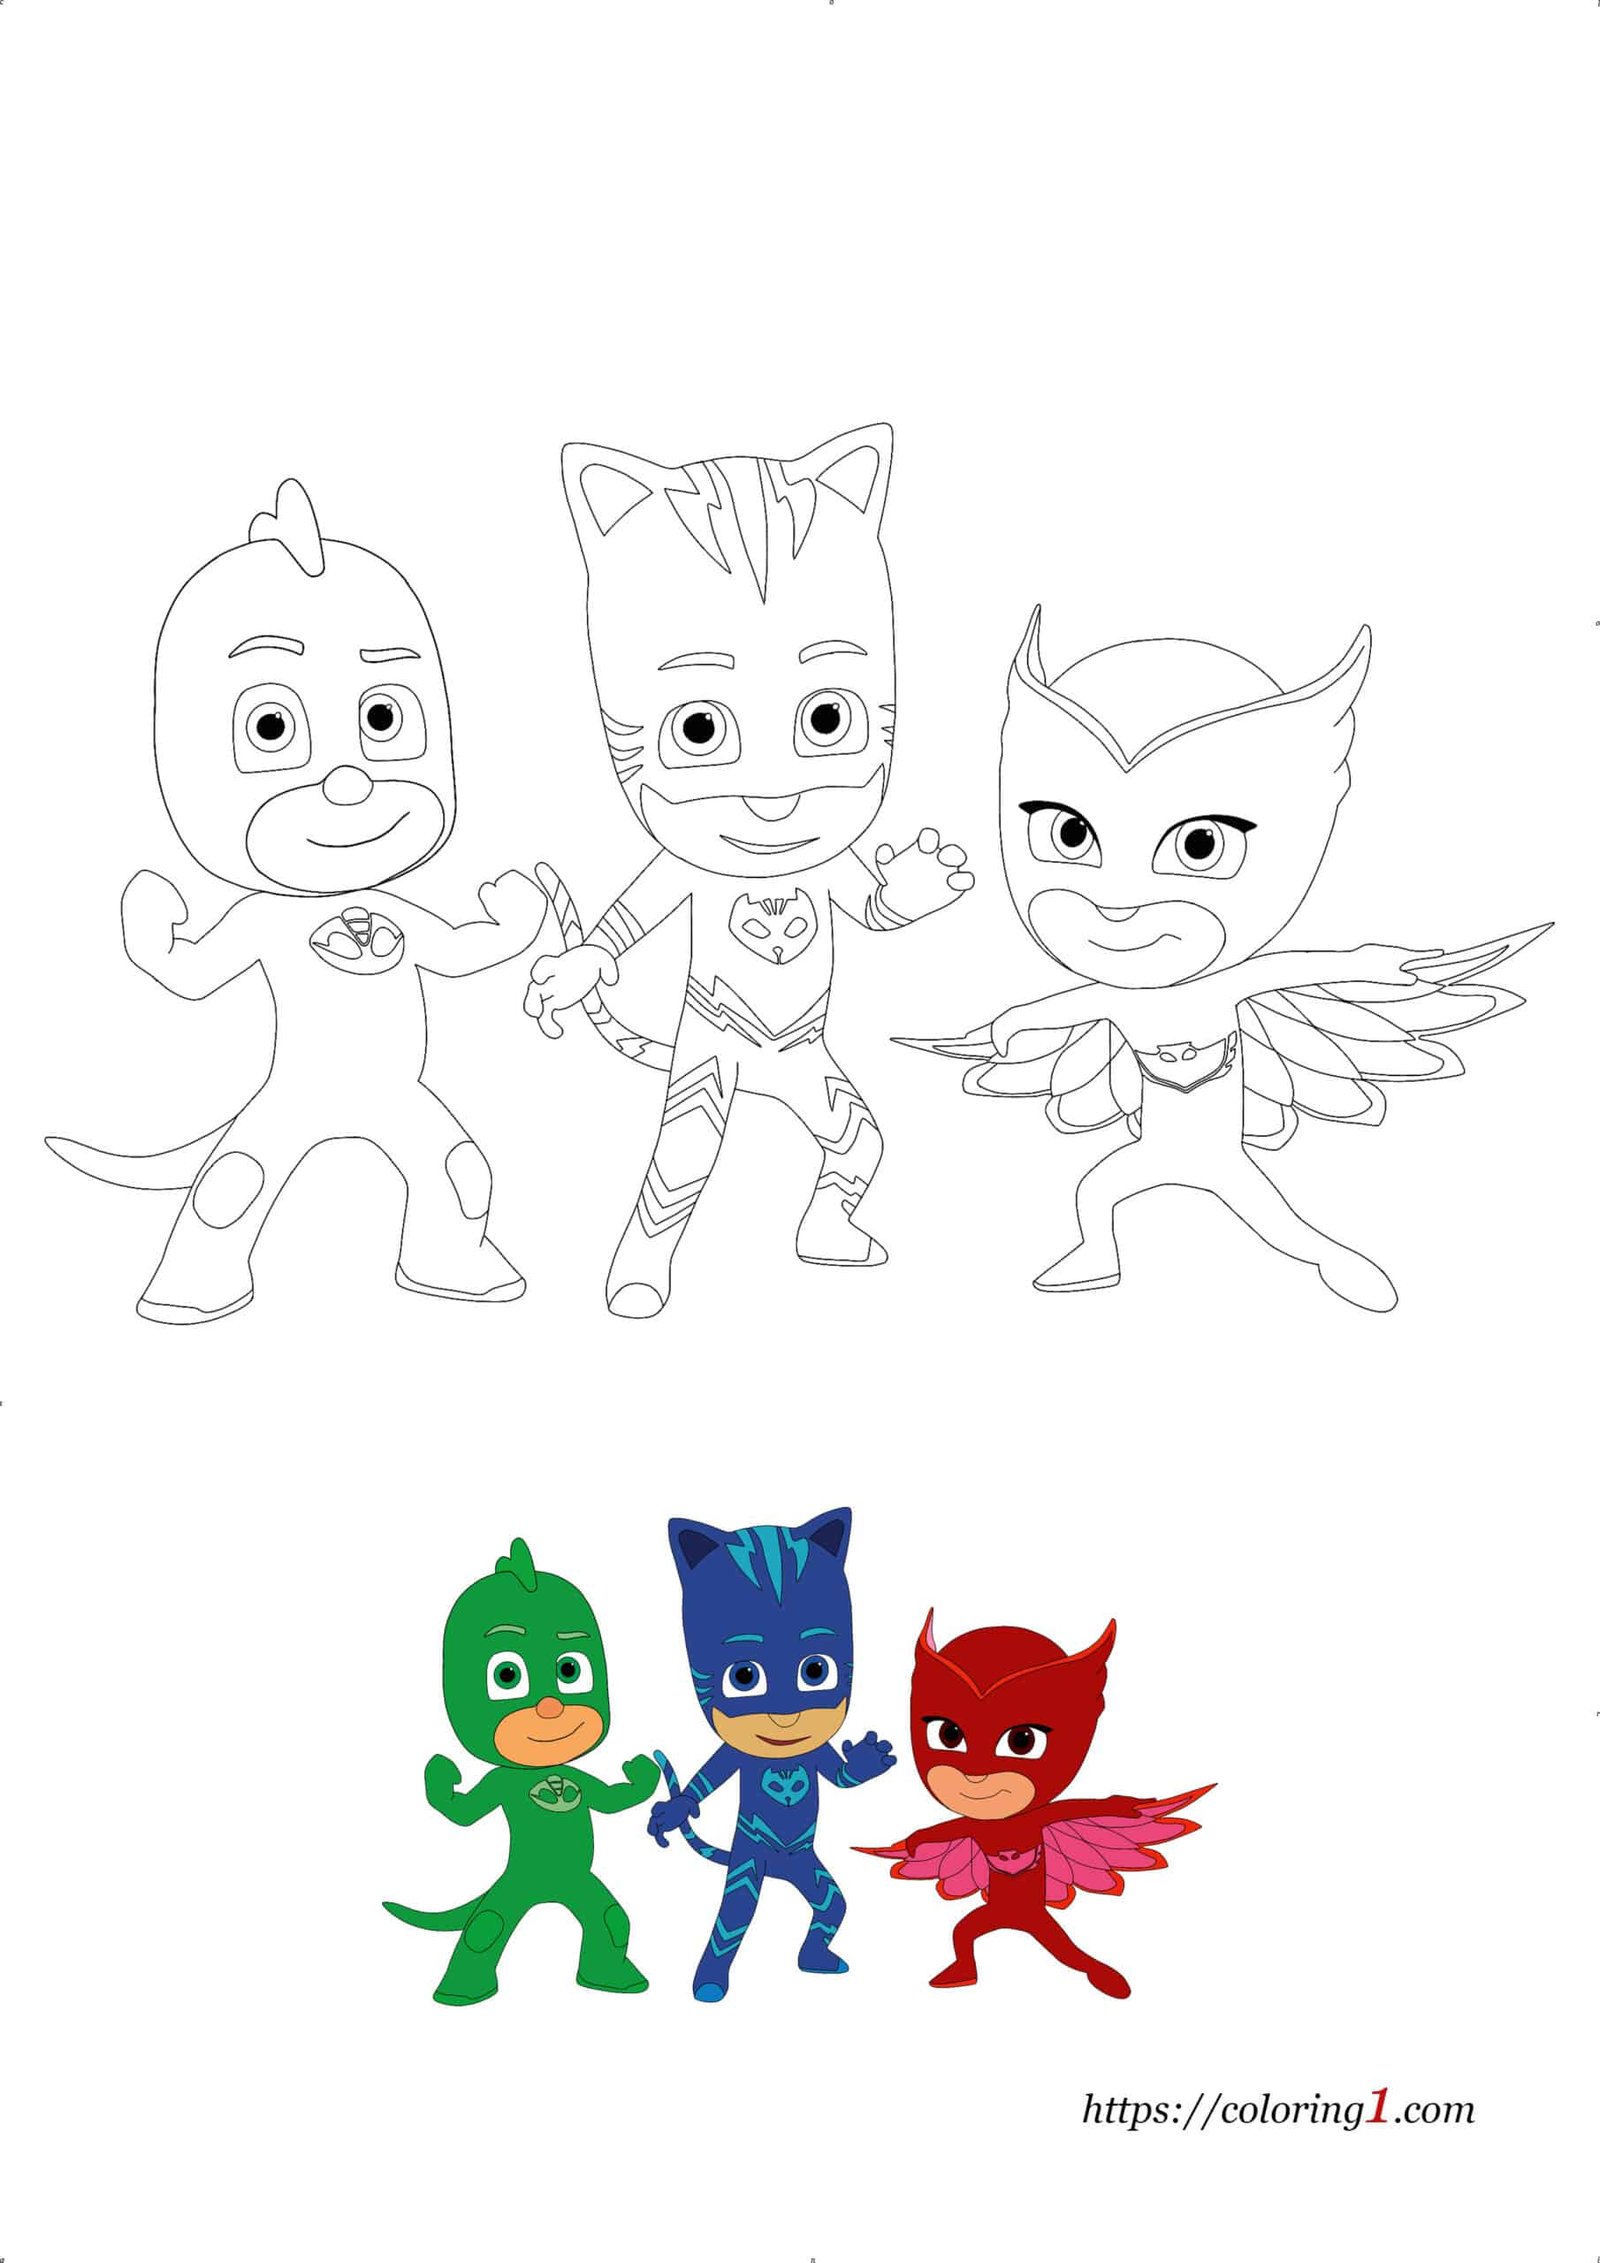 Pj masks characters coloring pages